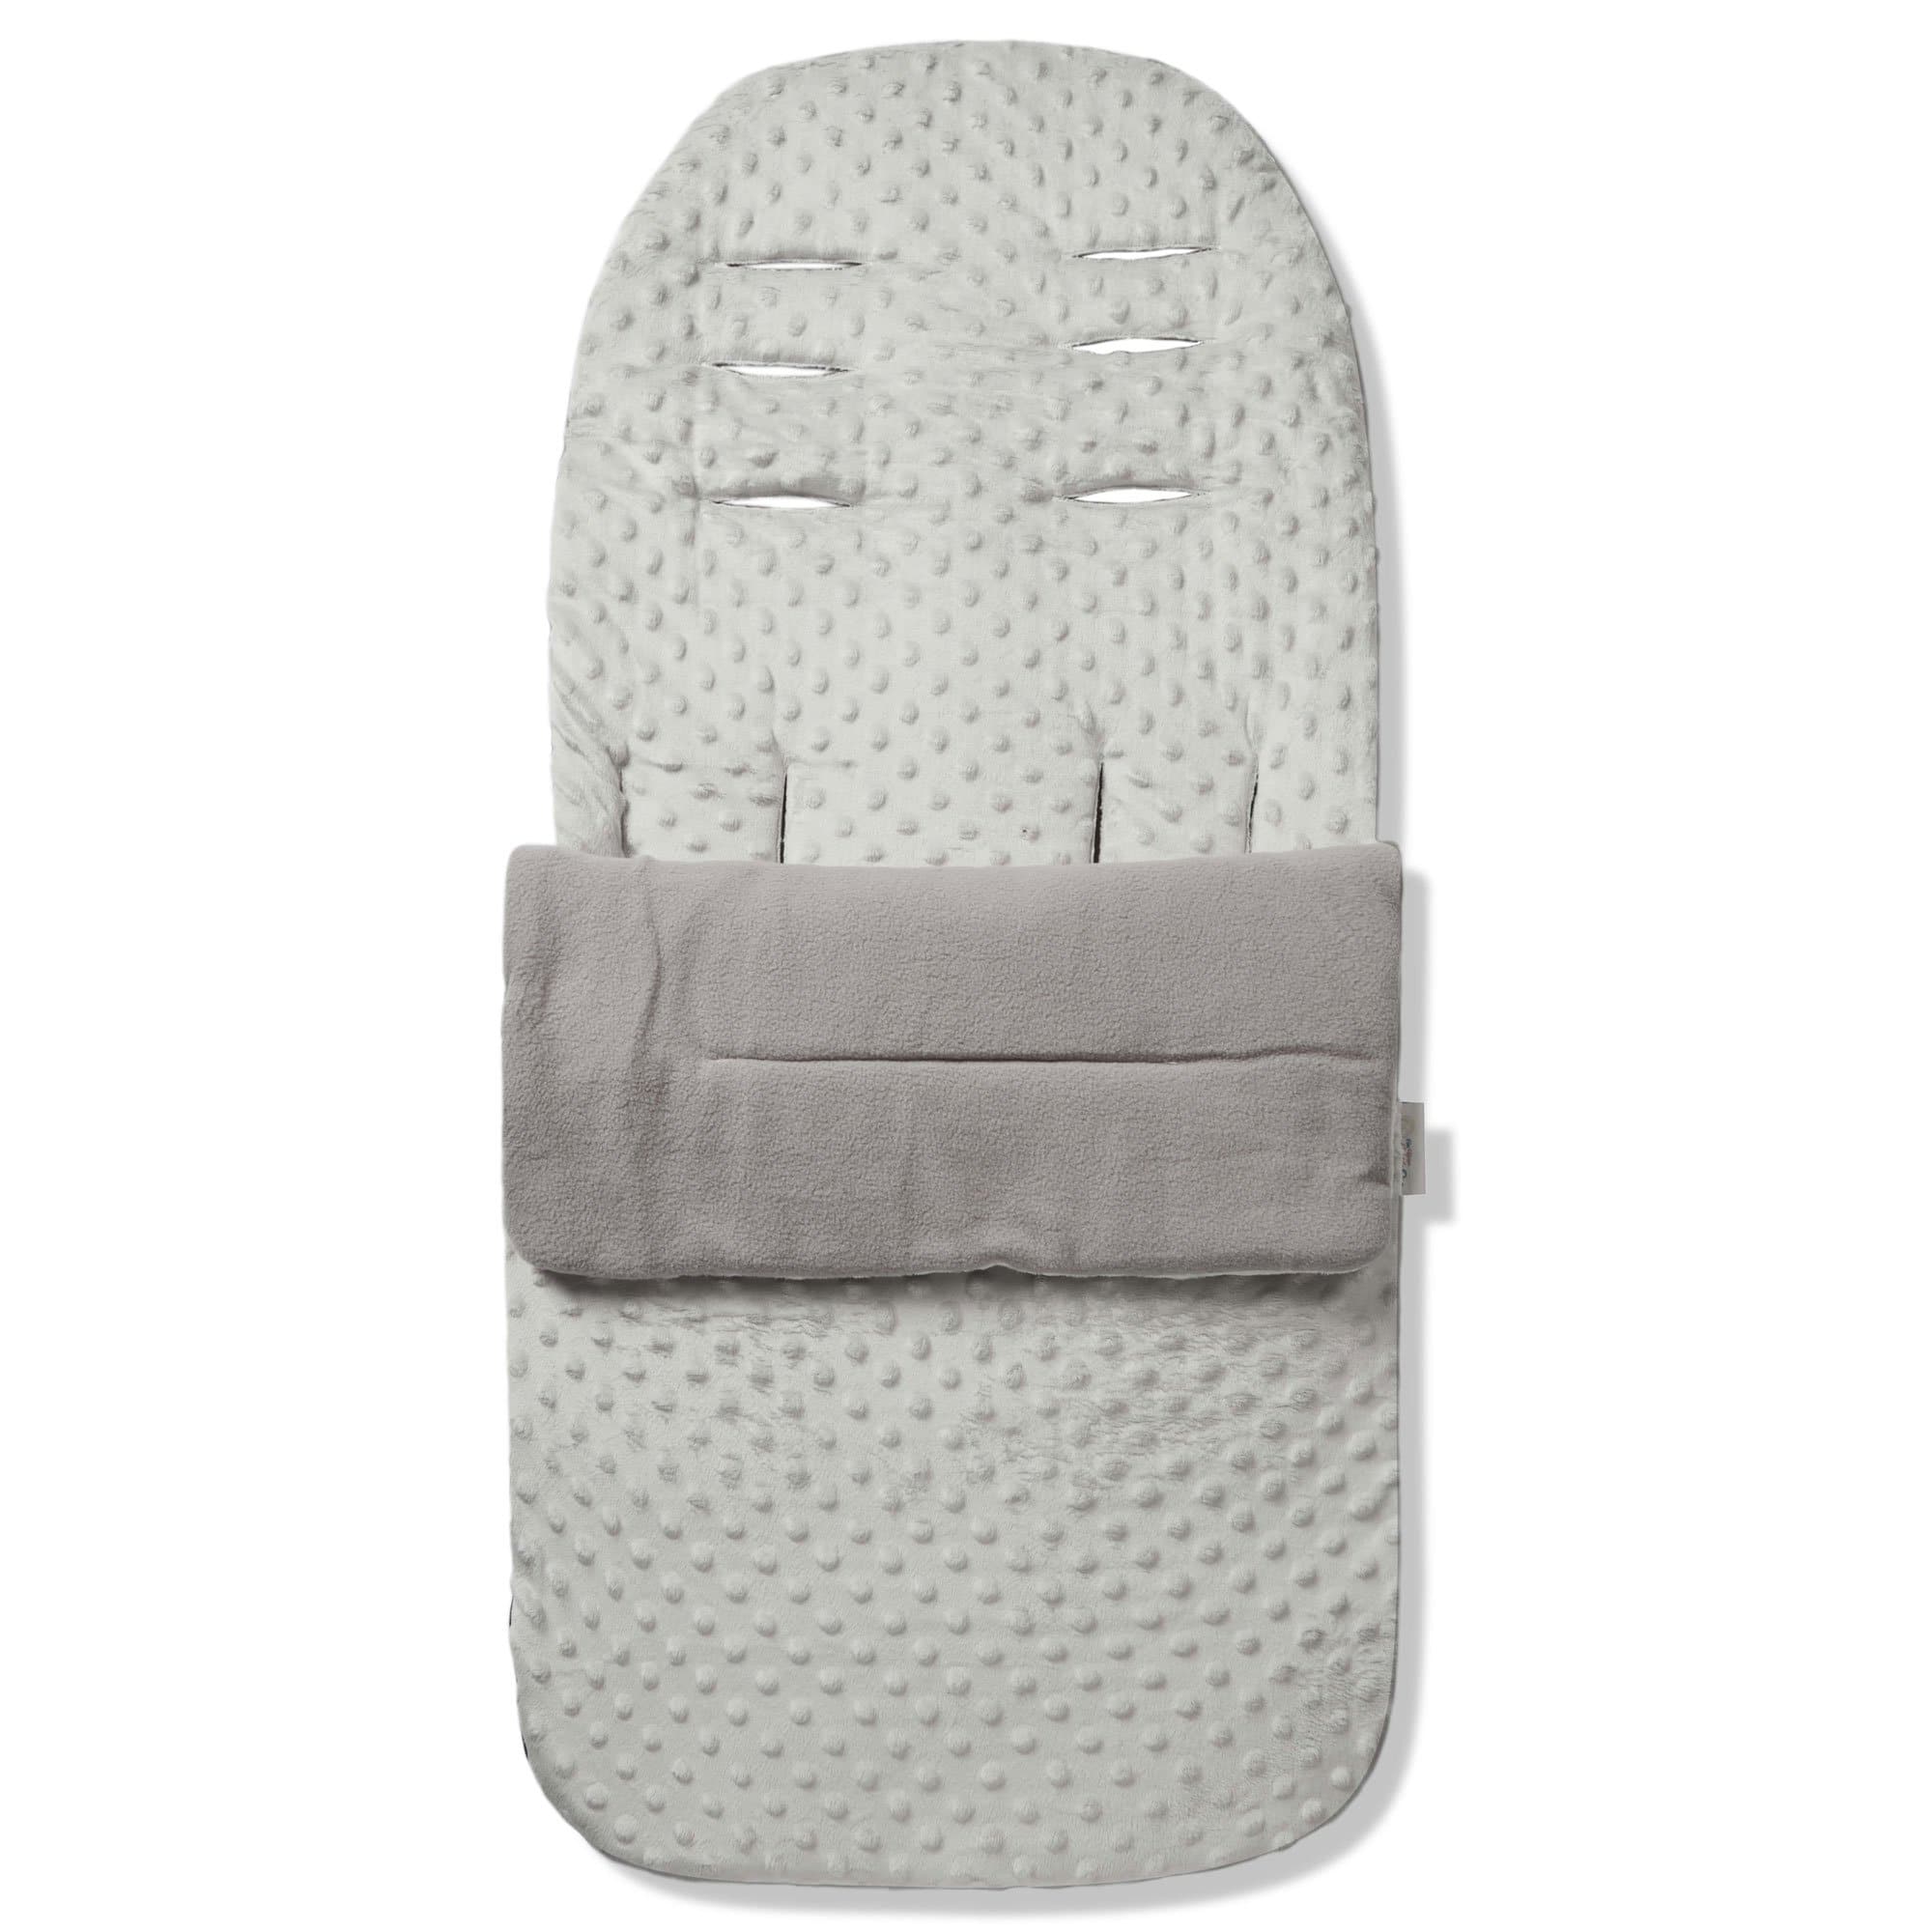 Dimple Footmuff / Cosy Toes Compatible with Casual - Grey / Fits All Models | For Your Little One